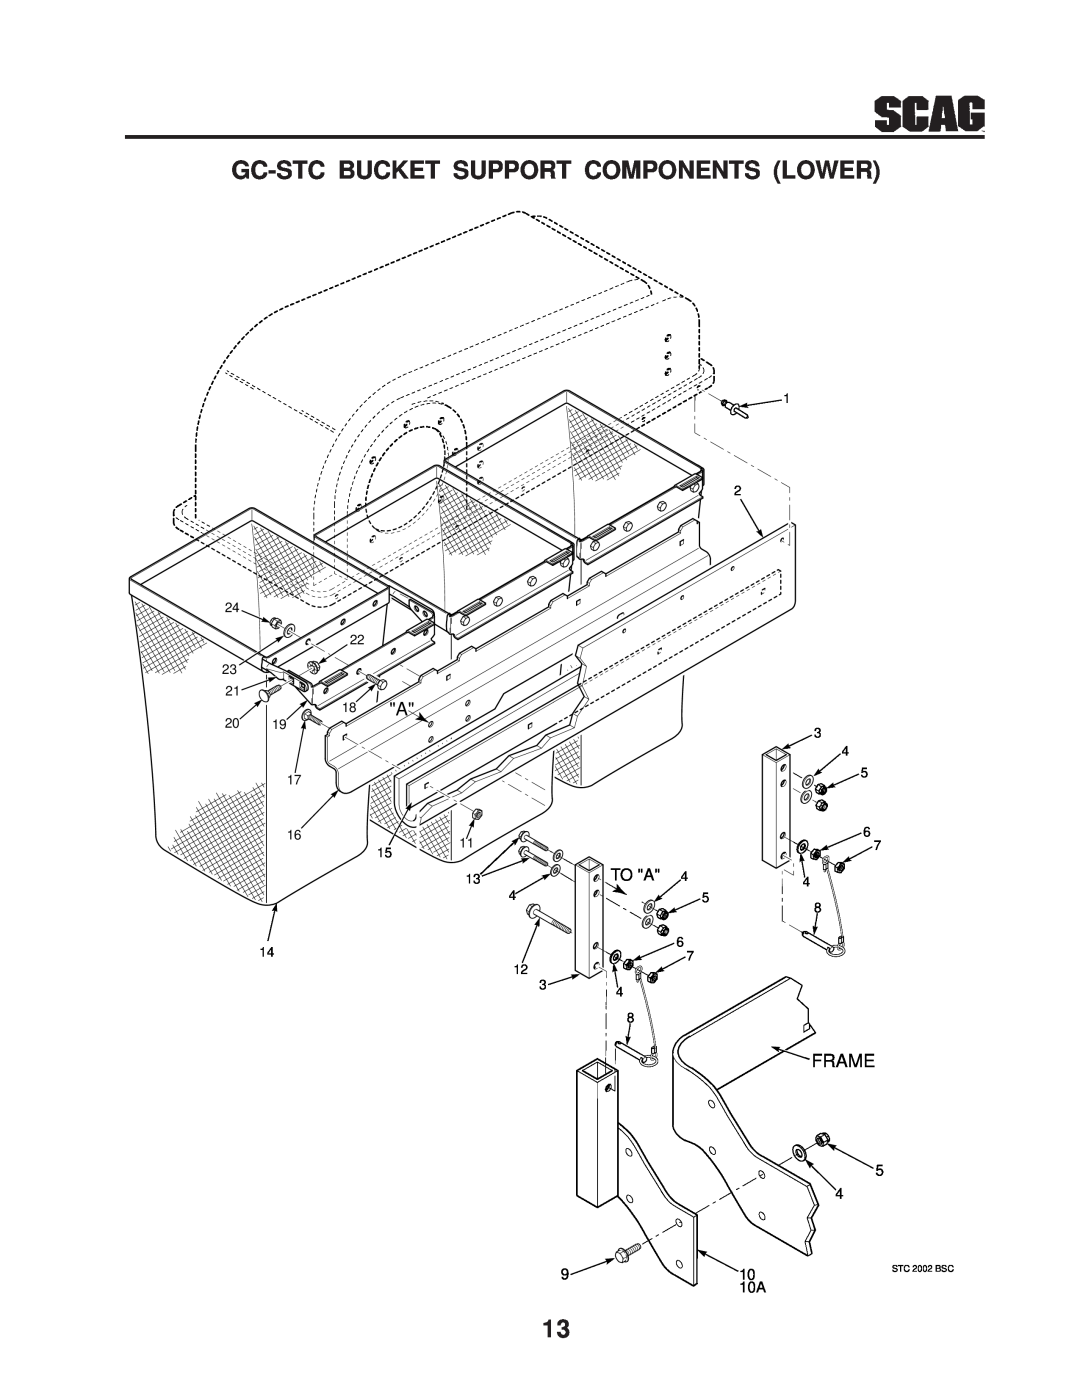 Scag Power Equipment GC-STC manual Gc-Stc Bucket Support Components Lower, Frame, To A, STC 2002 BSC 